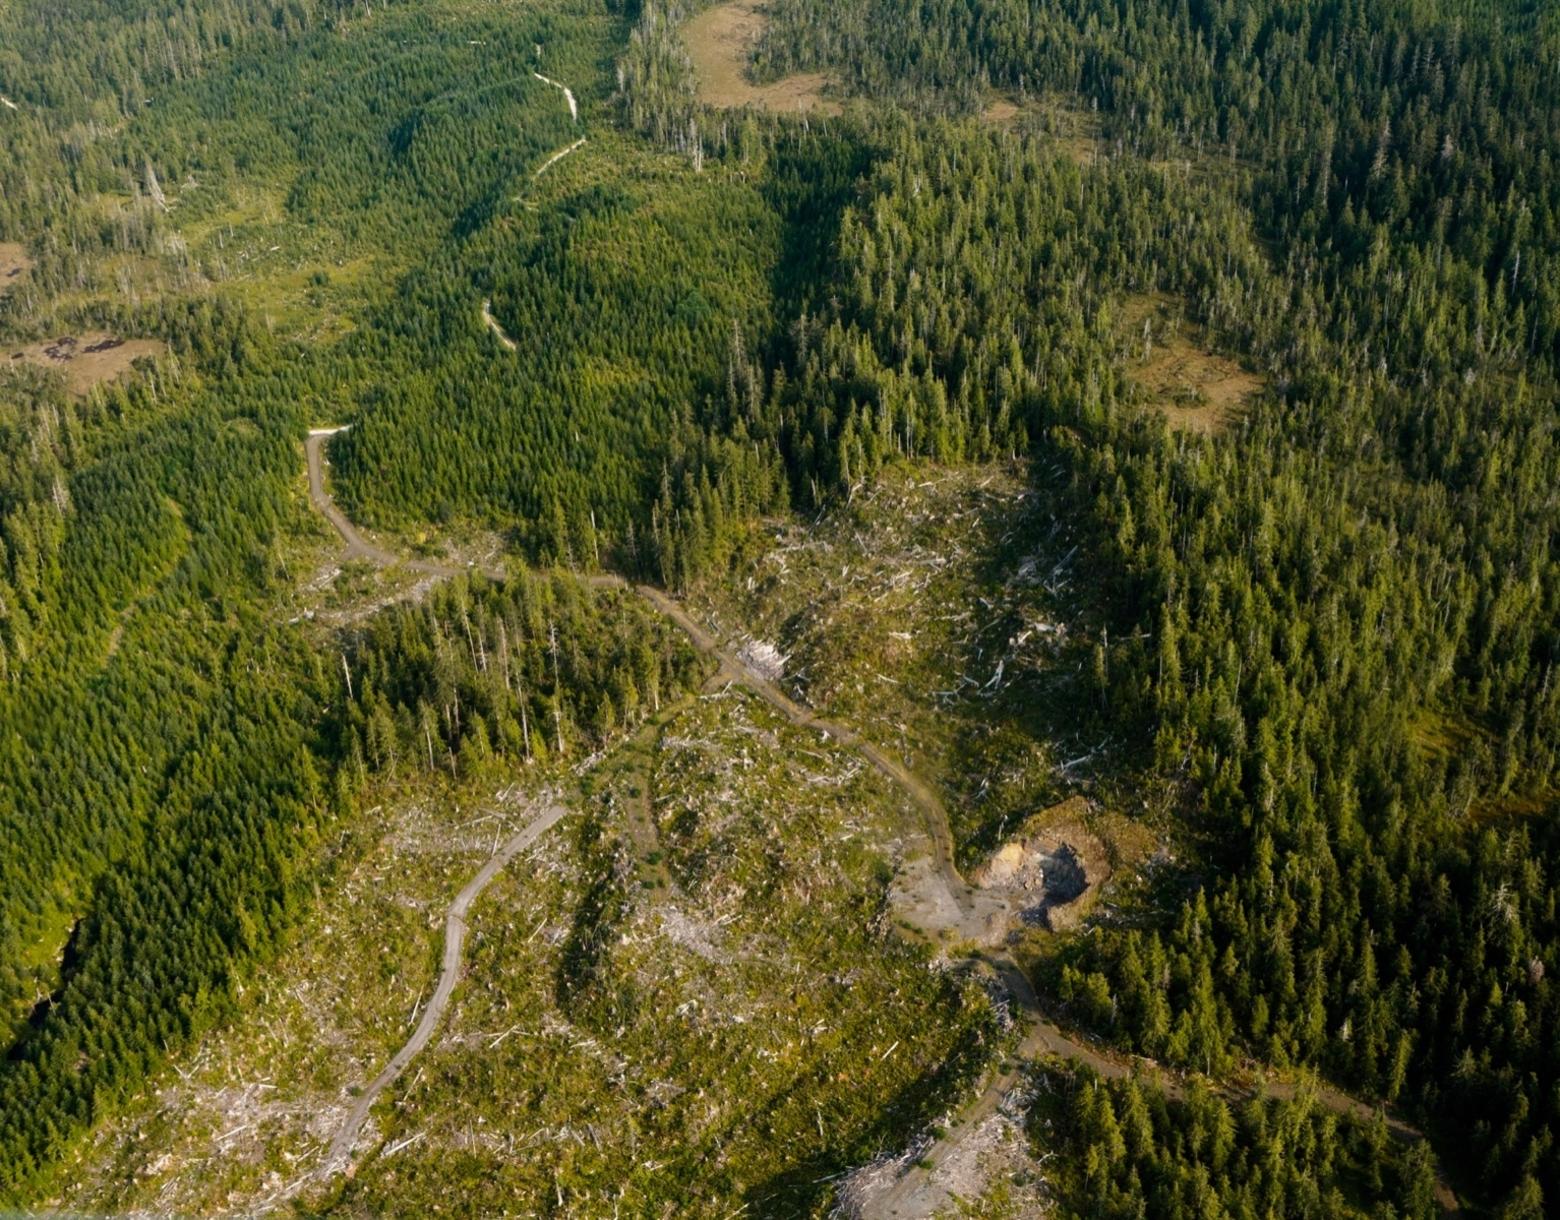 What kind of jobs are worth taxpayers subsidizing construction of hundreds of thousands of miles of logging roads that enable forests to be clearcut and sometimes felled old-growth trees exported, for pennies on the dollar to Asia, meanwhile leaving devastated ecosystems behind in their wake?  A photo of the Tongass National Forest, courtesy Al Wu